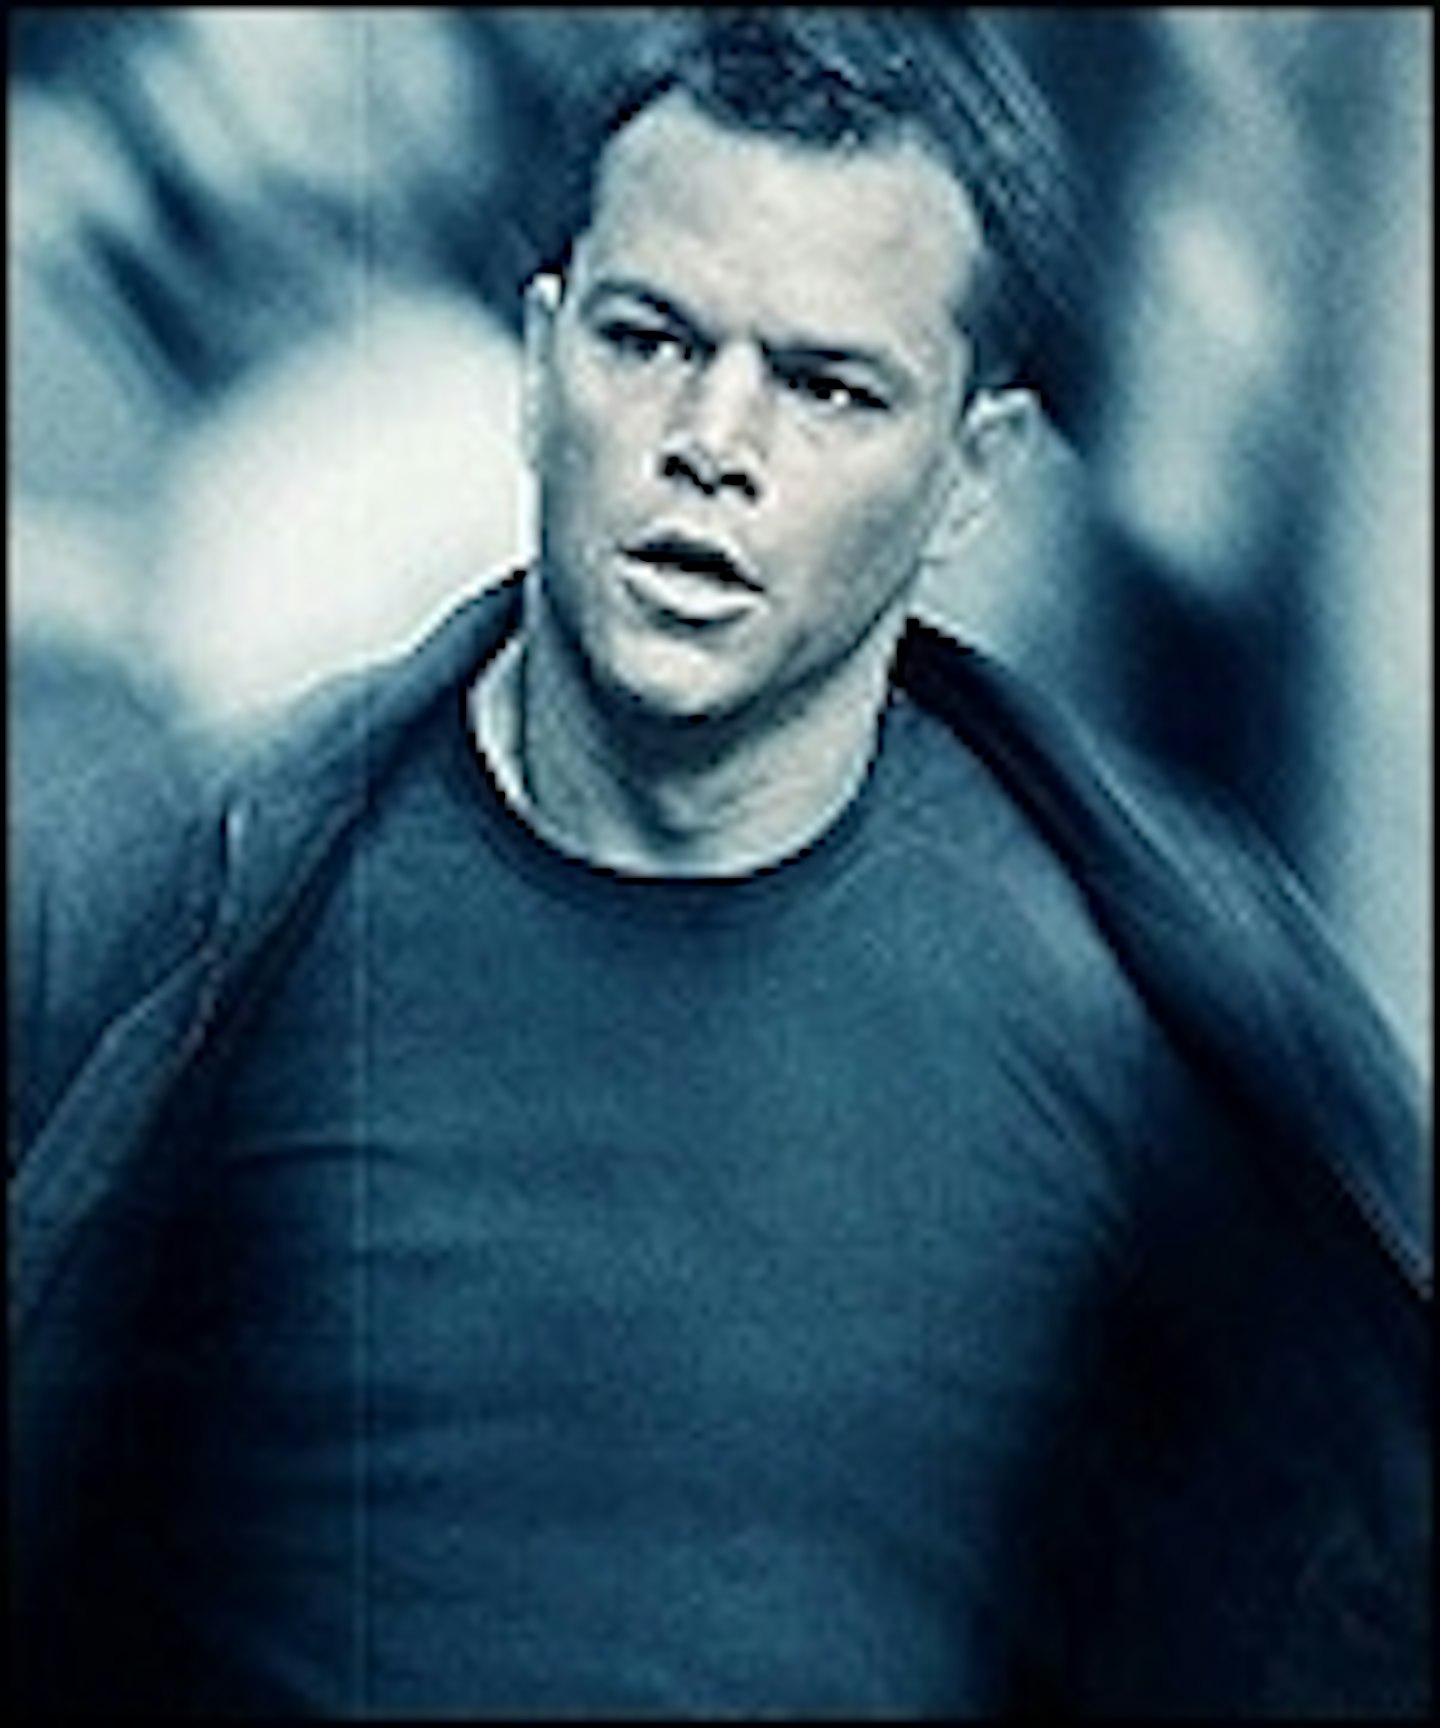 Exclusive: New Bourne Trailer Hits